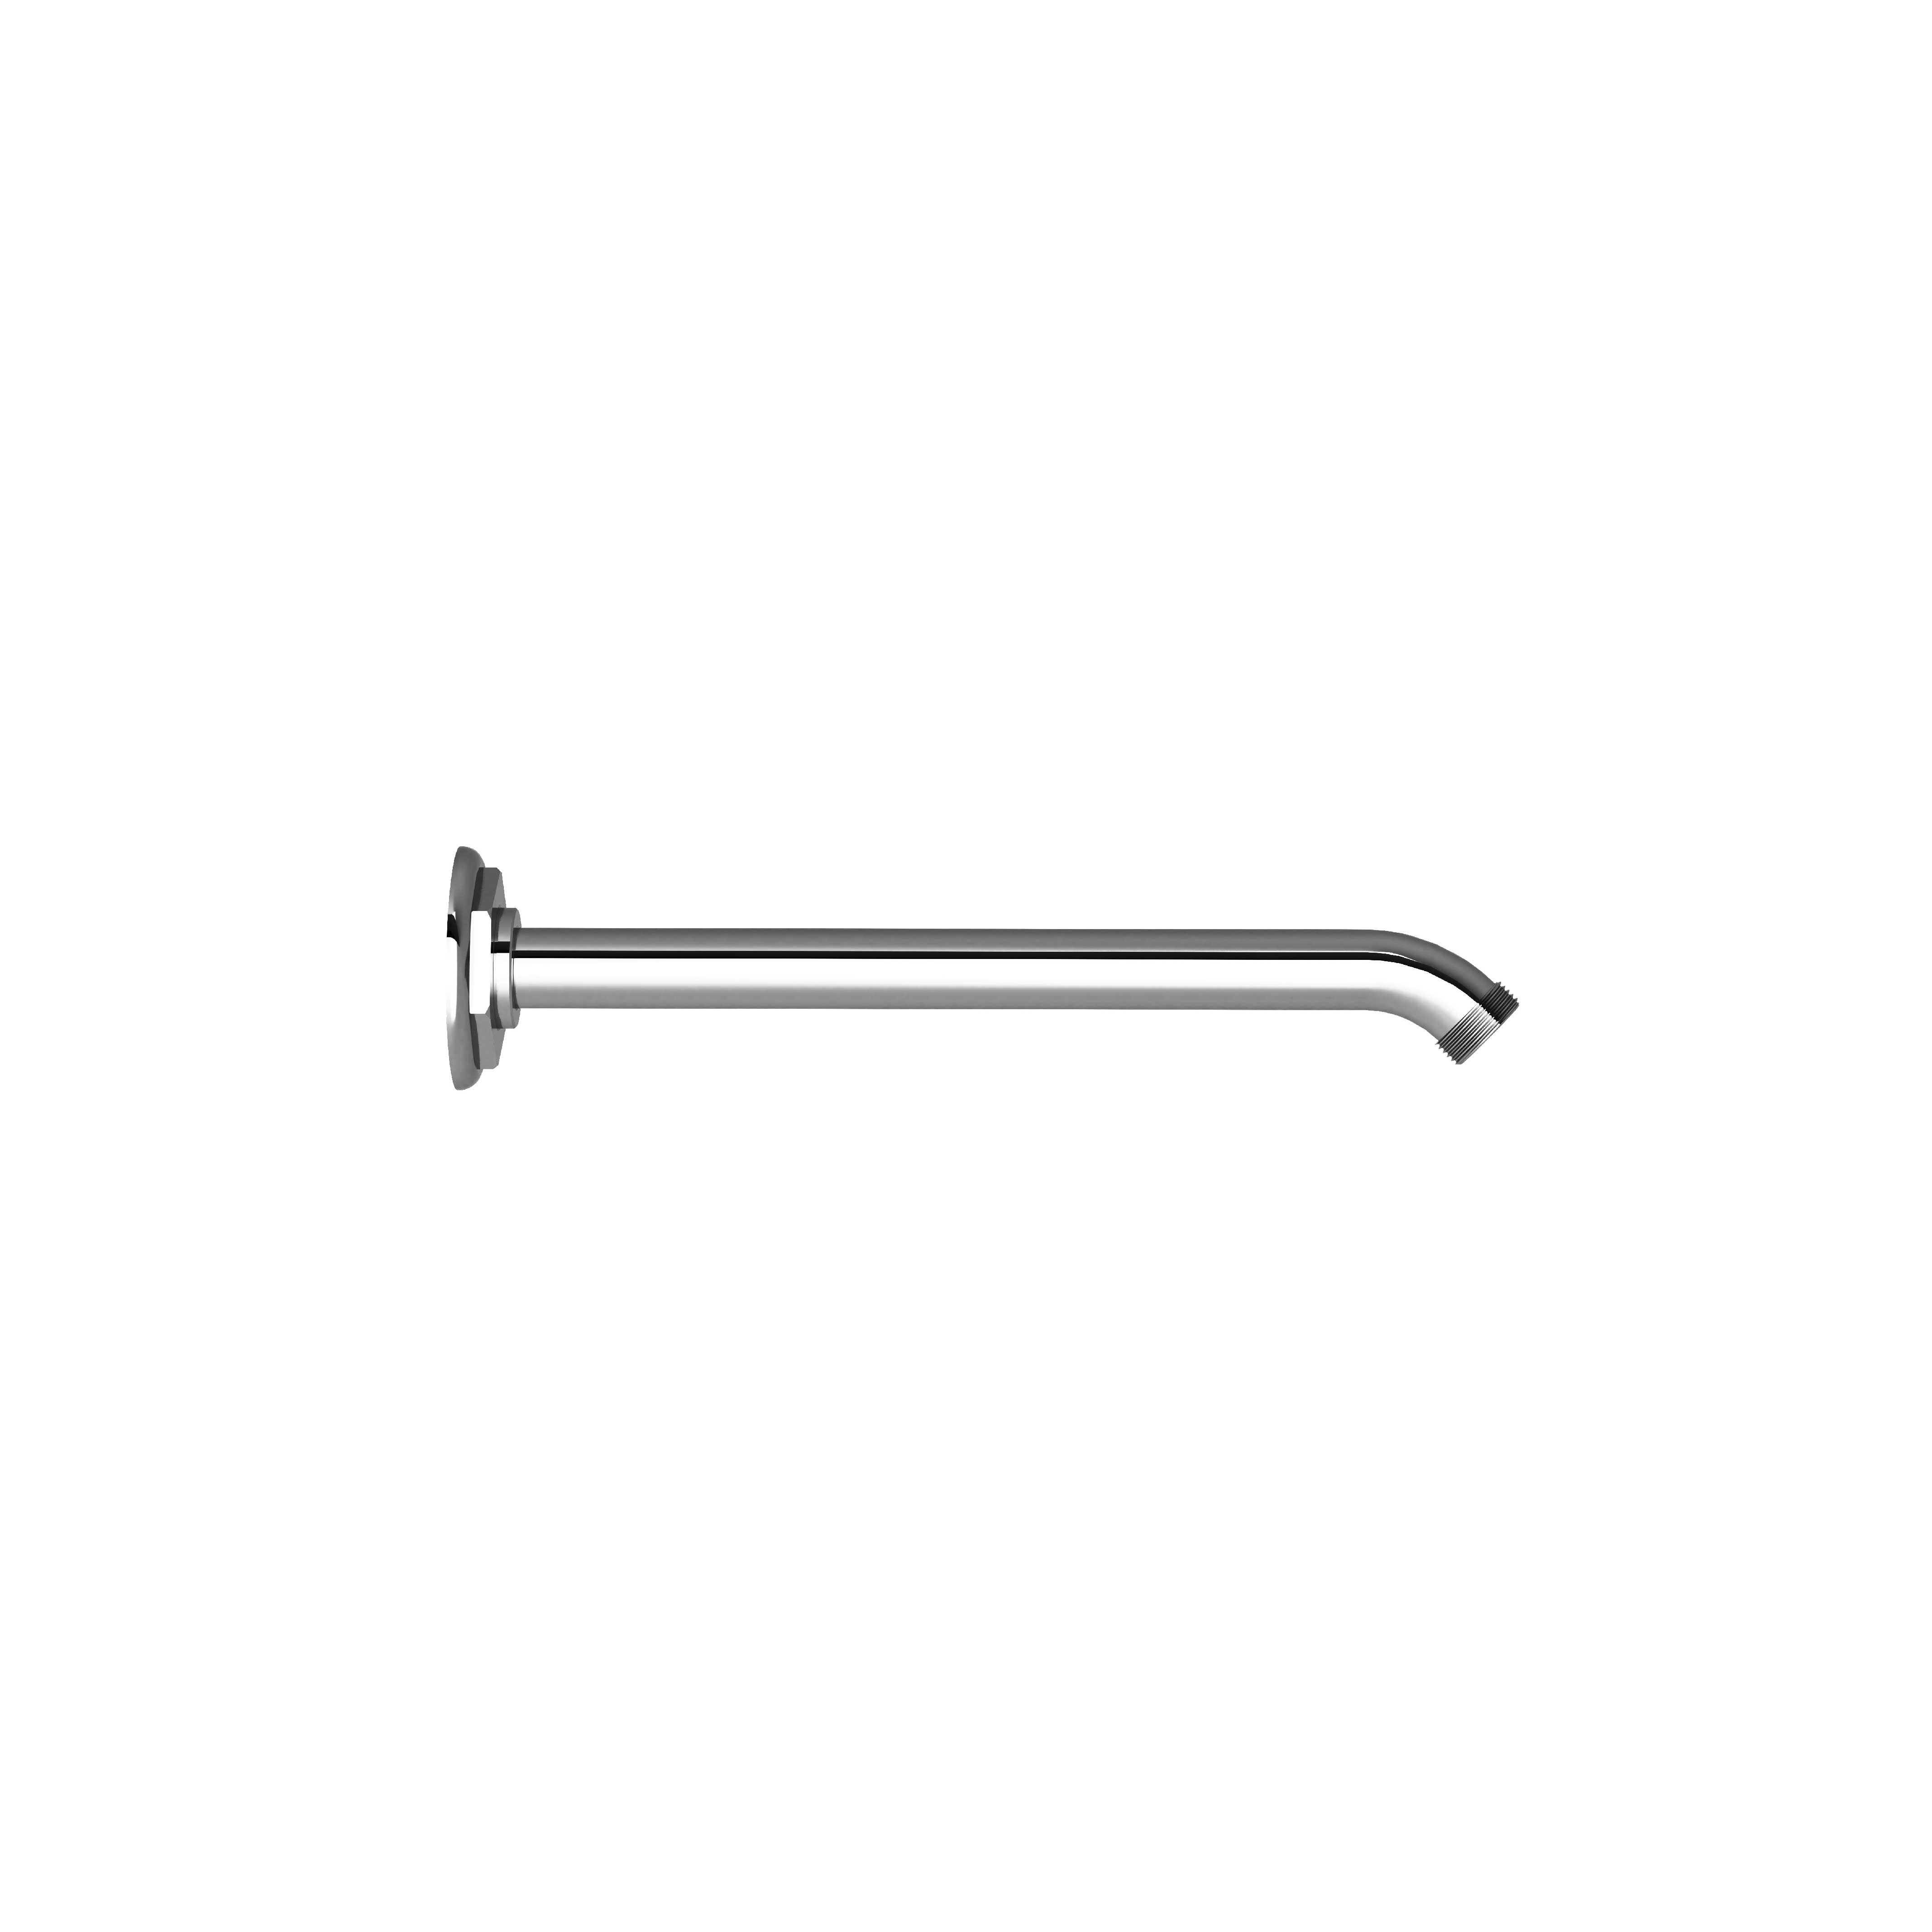 M81-2W170 Wall mounted shower arm 170mm